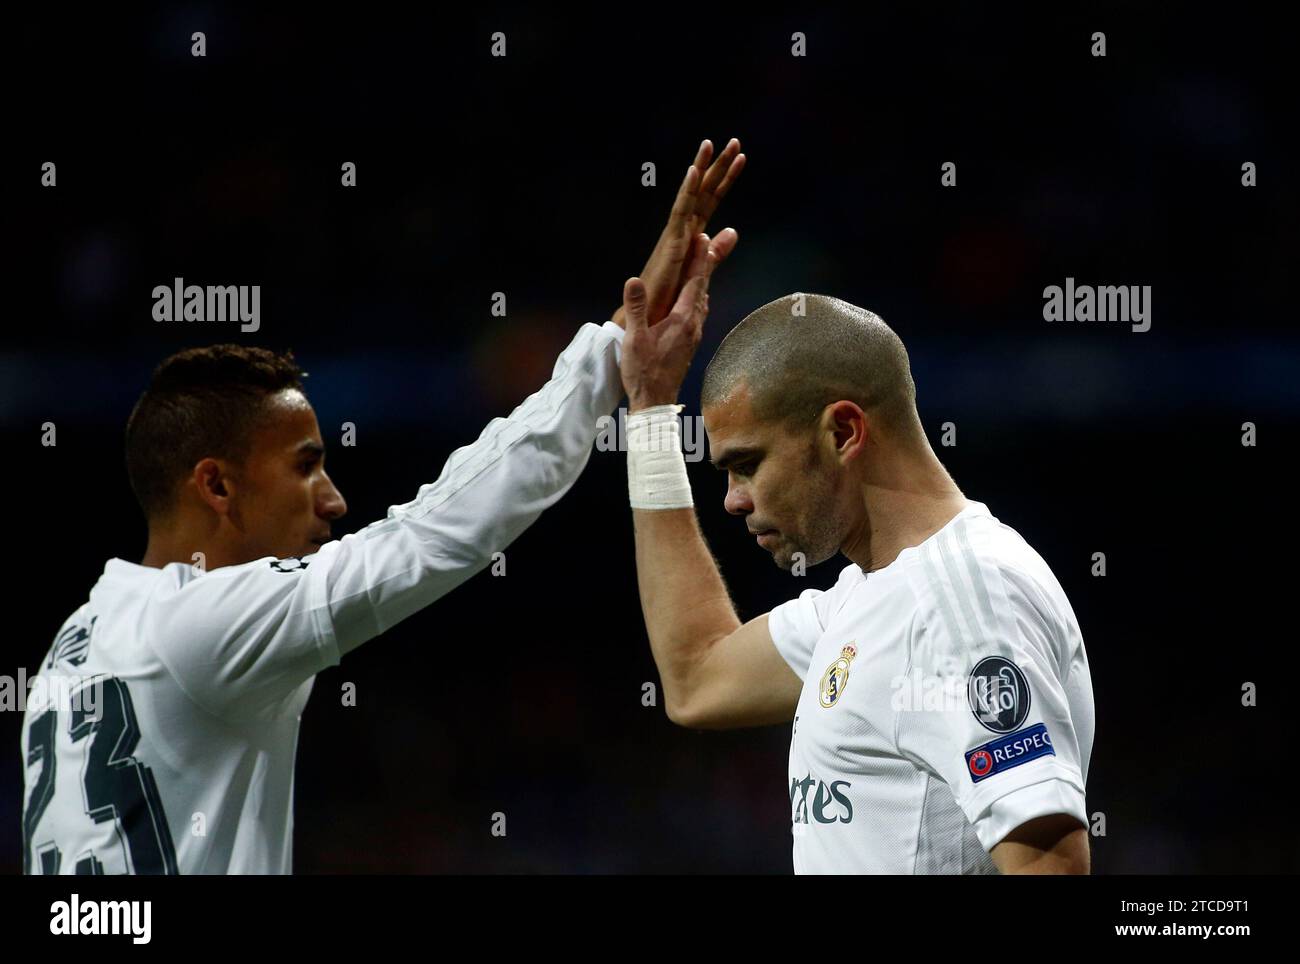 Madrid, 03/08/2016. Chamions League match played at the Santiago Bernabéu stadium, between Real Madrid and Roma. In the image, Pepe during the game. Photo: Oscar del Pozo ARCHDC. Credit: Album / Archivo ABC / Oscar del Pozo Stock Photo